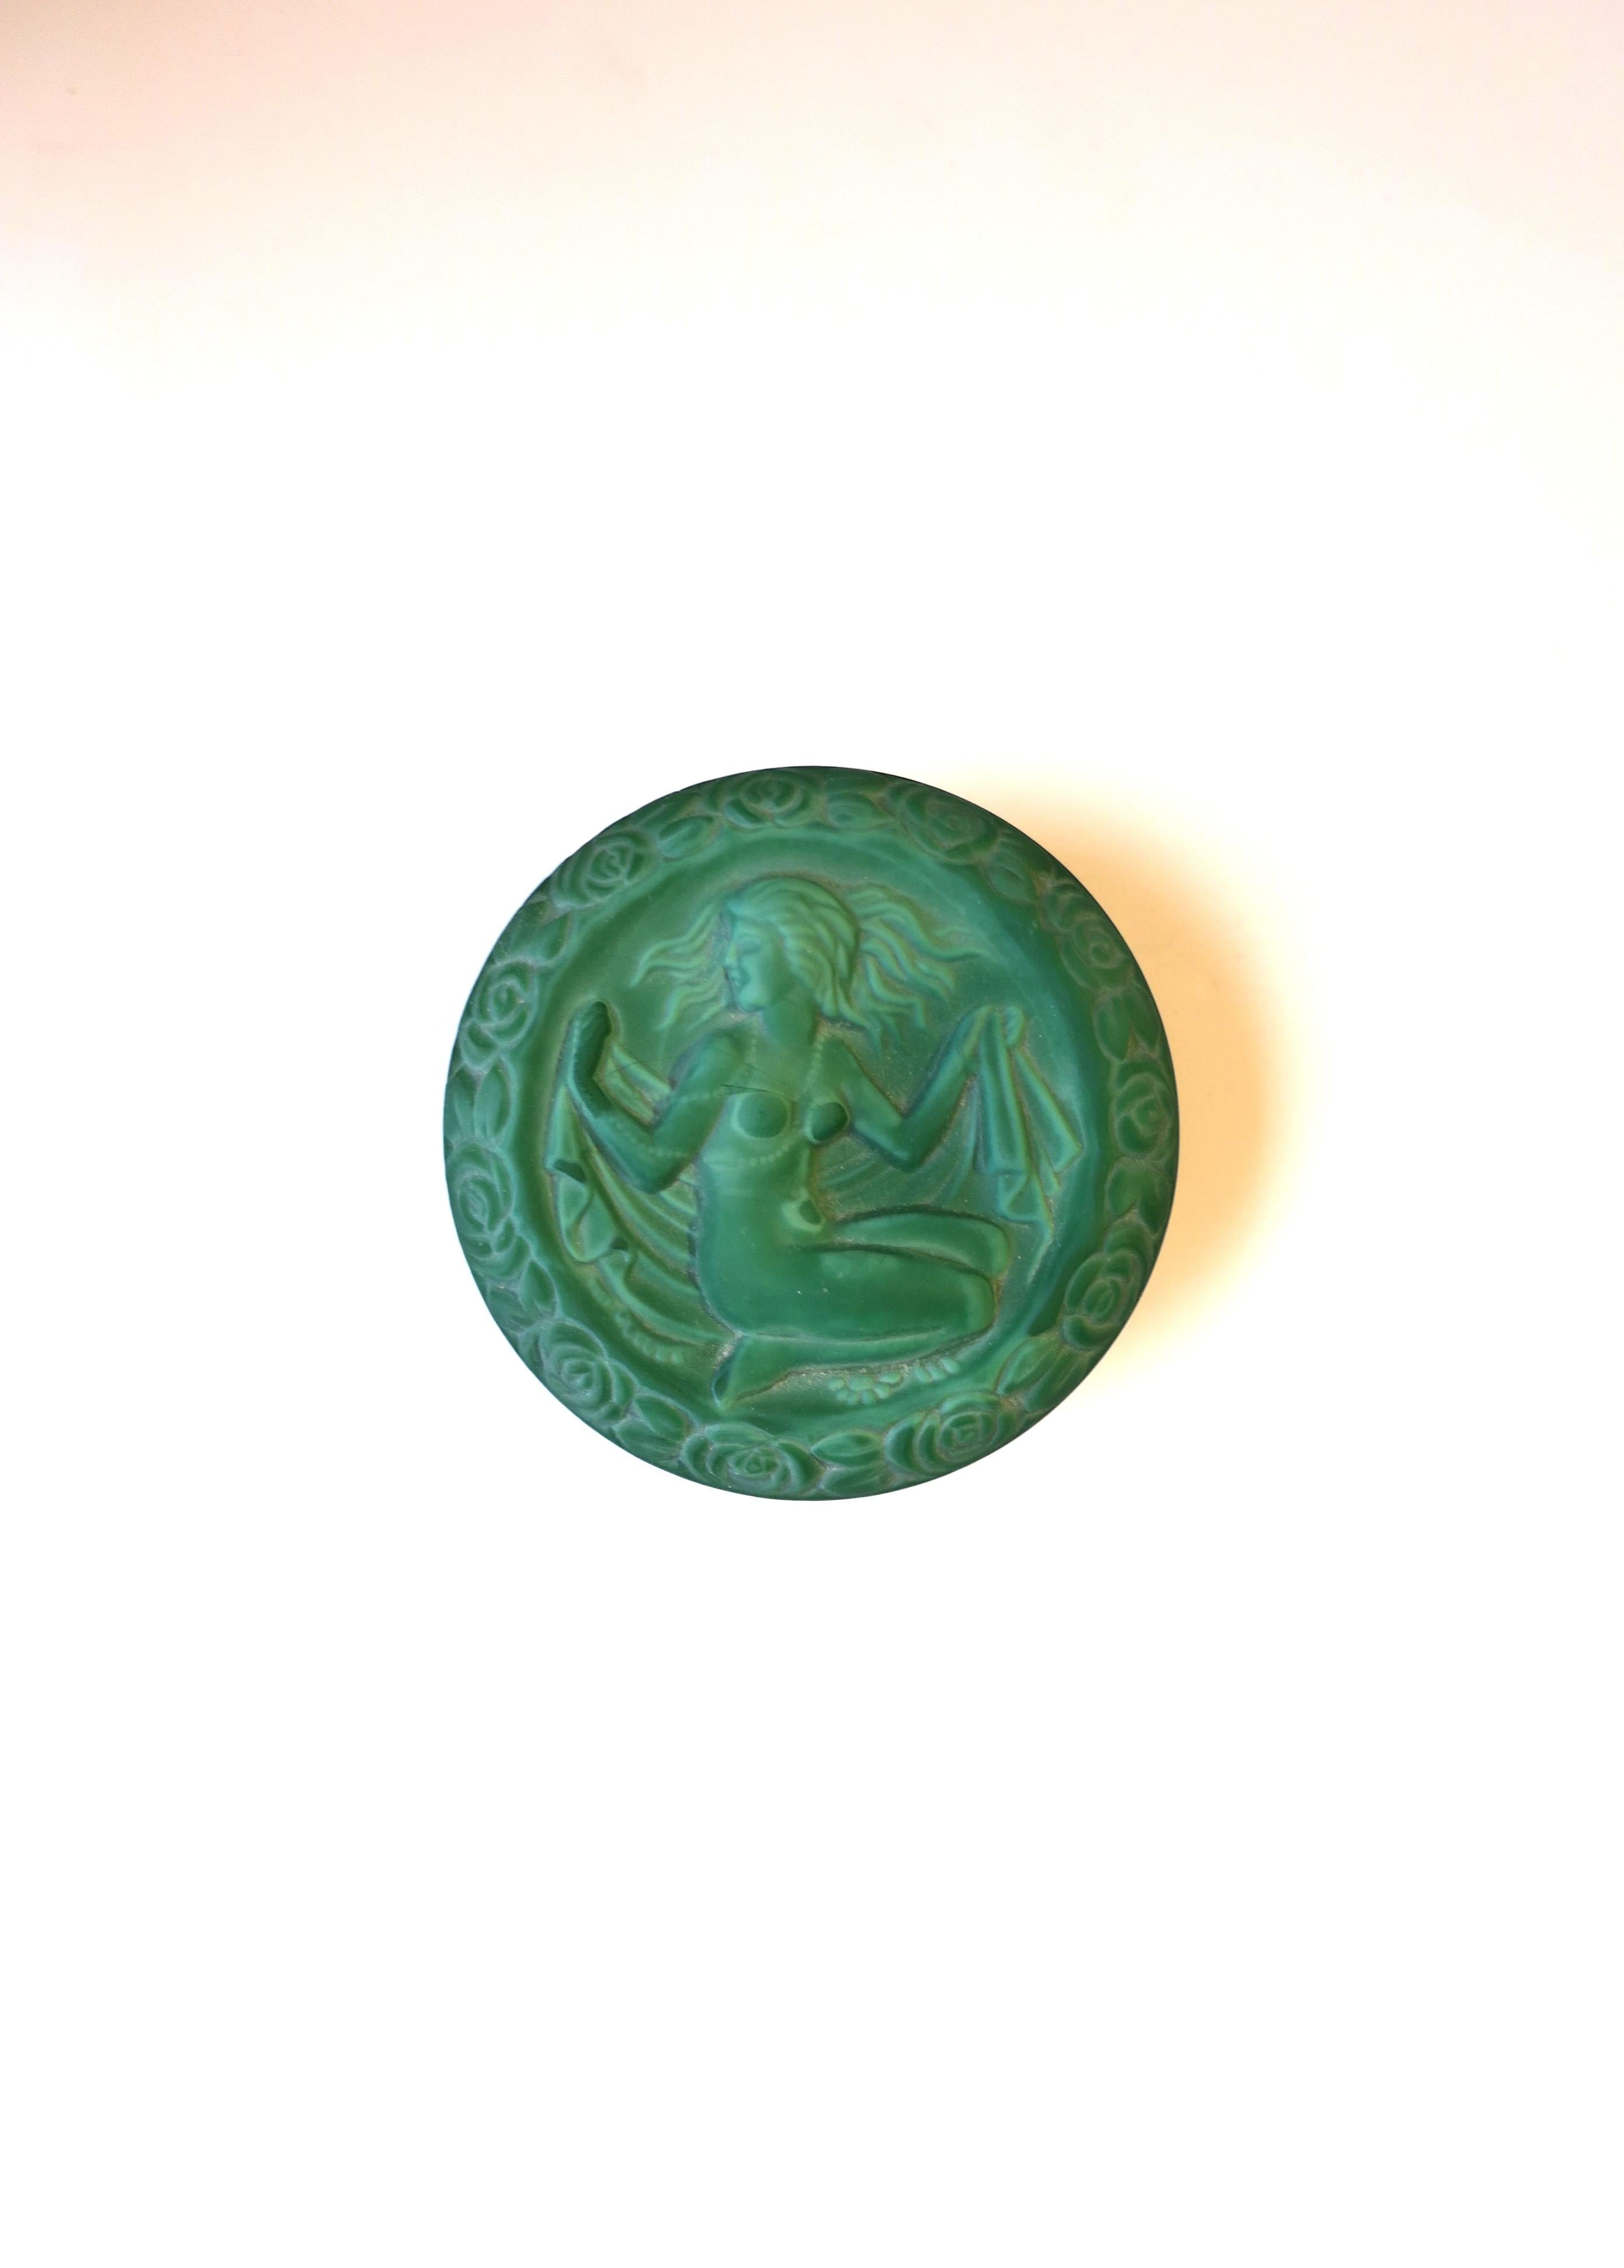 A beautiful hand-made green malachite glass box with female relief in the Art Deco style, circa late-20th century Czech Republic. This is a round box with a high relief of a female nude surrounded by flowers (around edge.) A beautiful box to hold